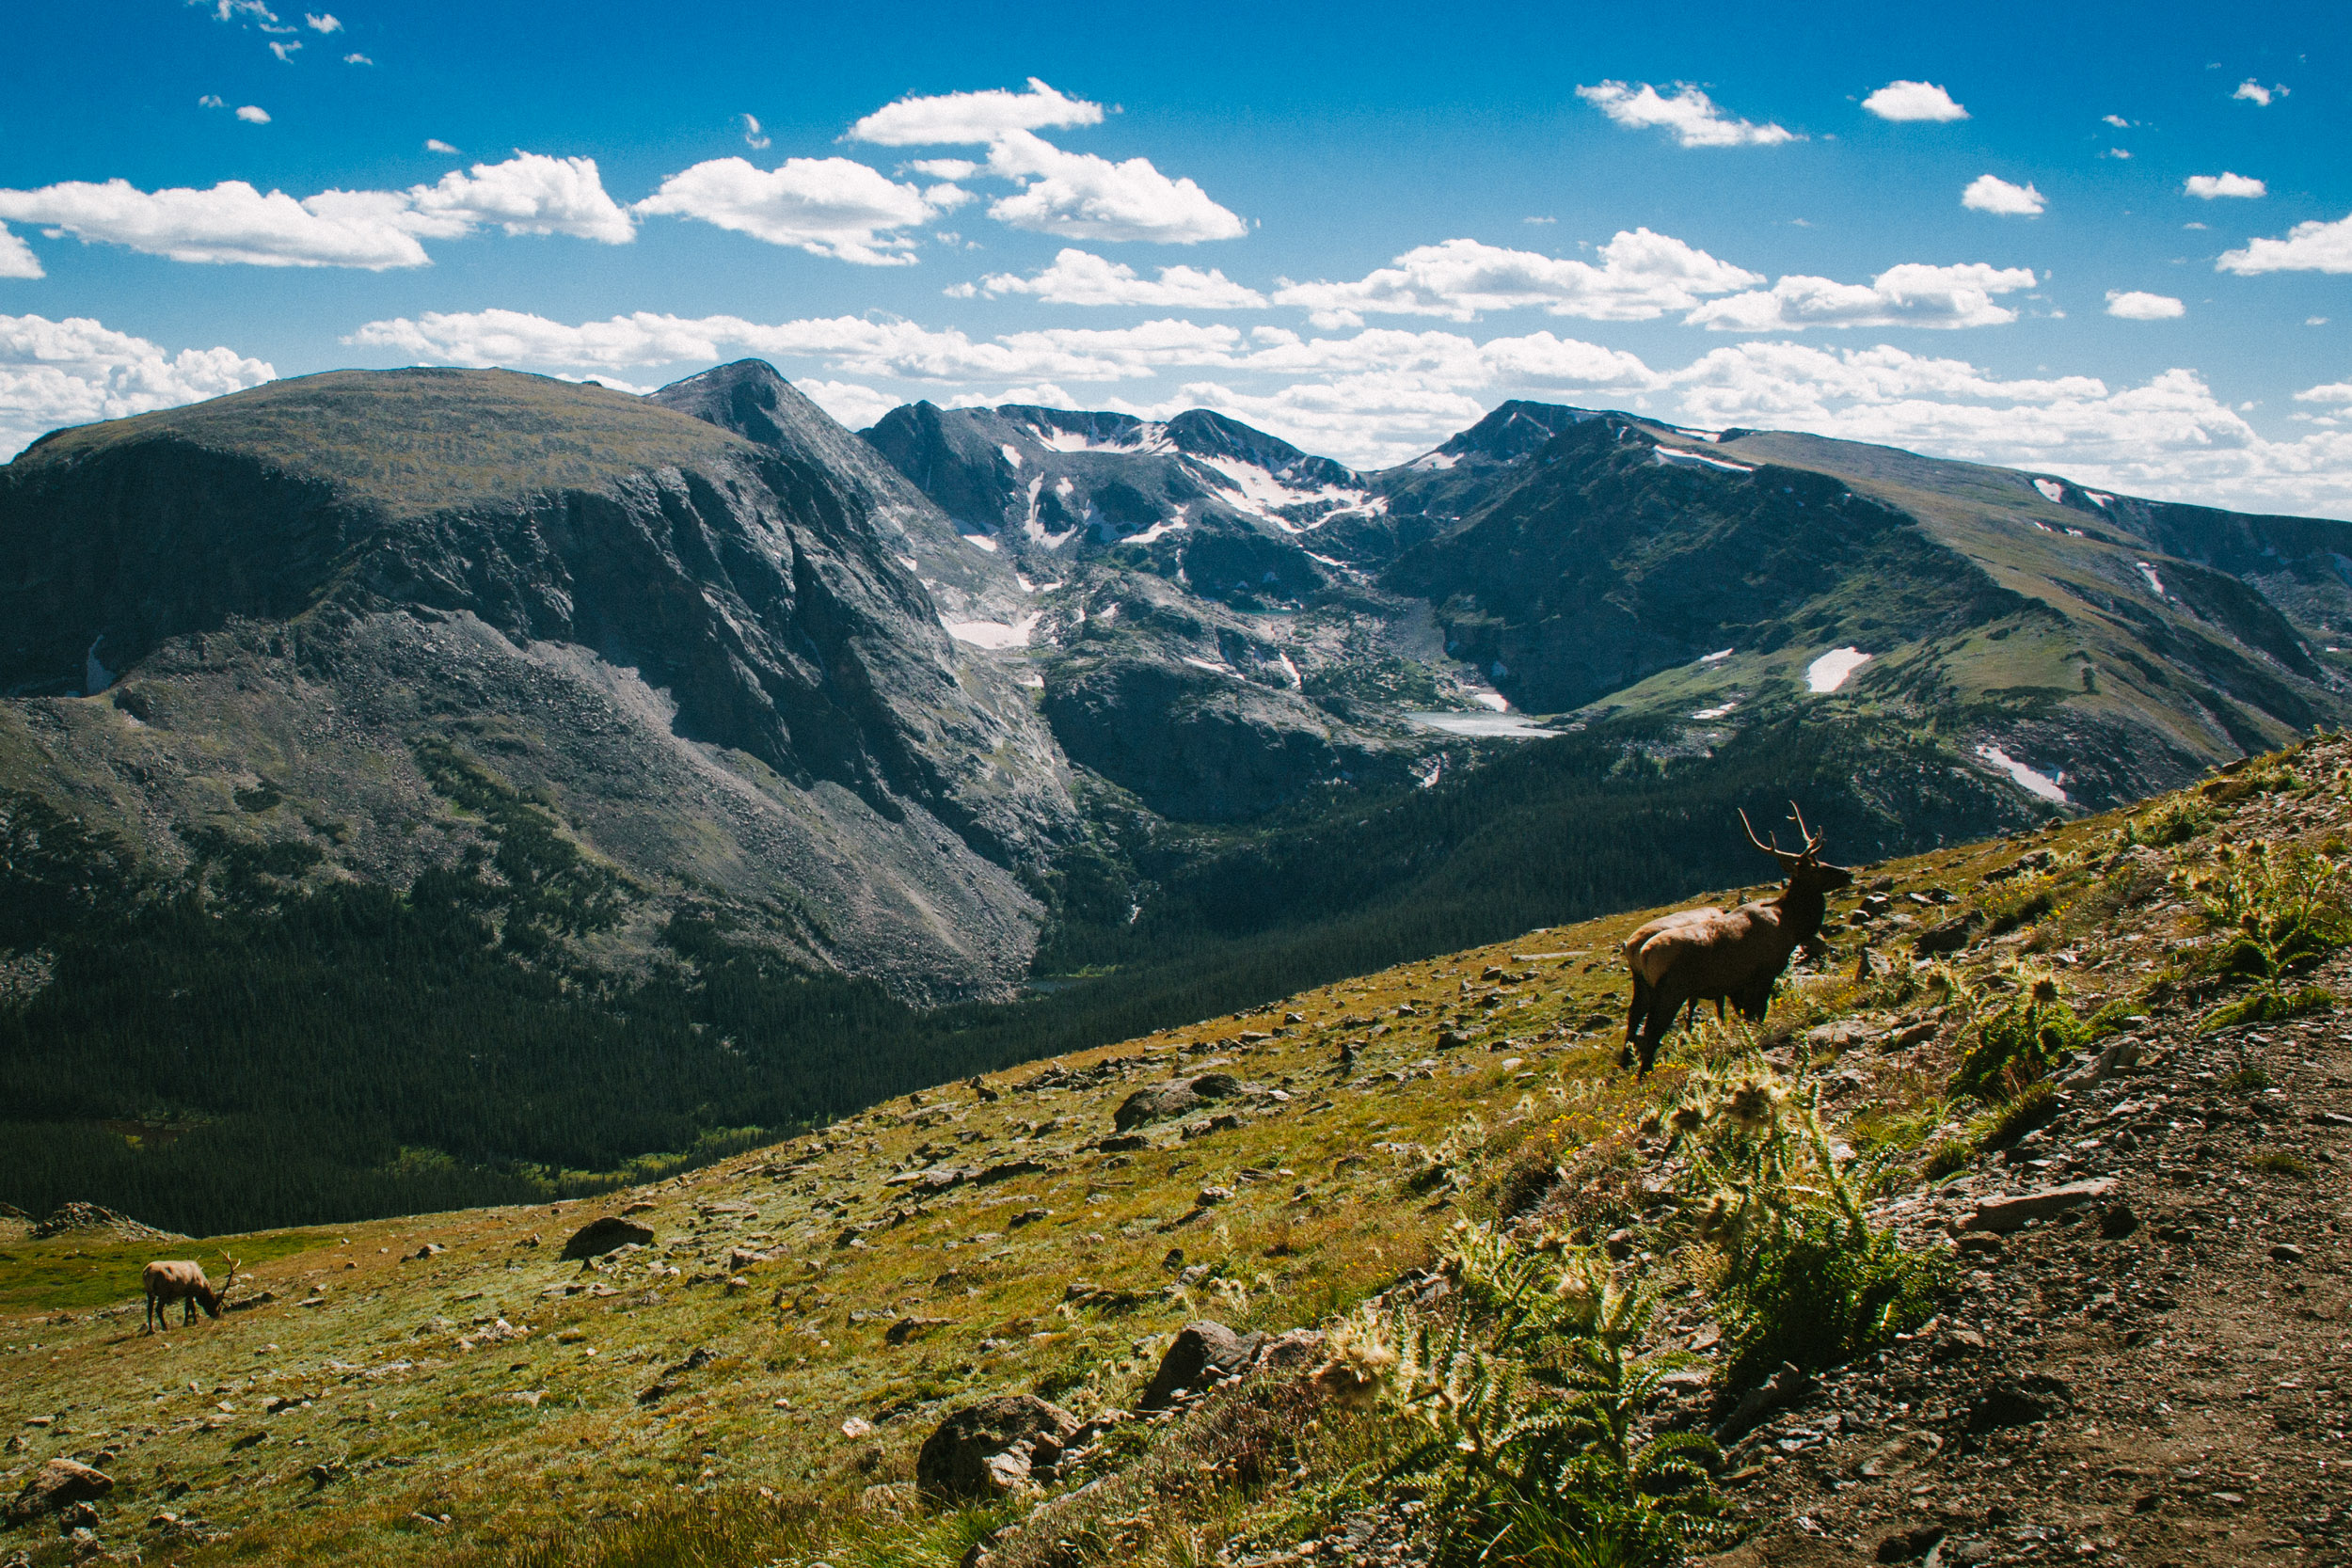 A pair of elk graze along the mountainside in Rocky Mountain National Park